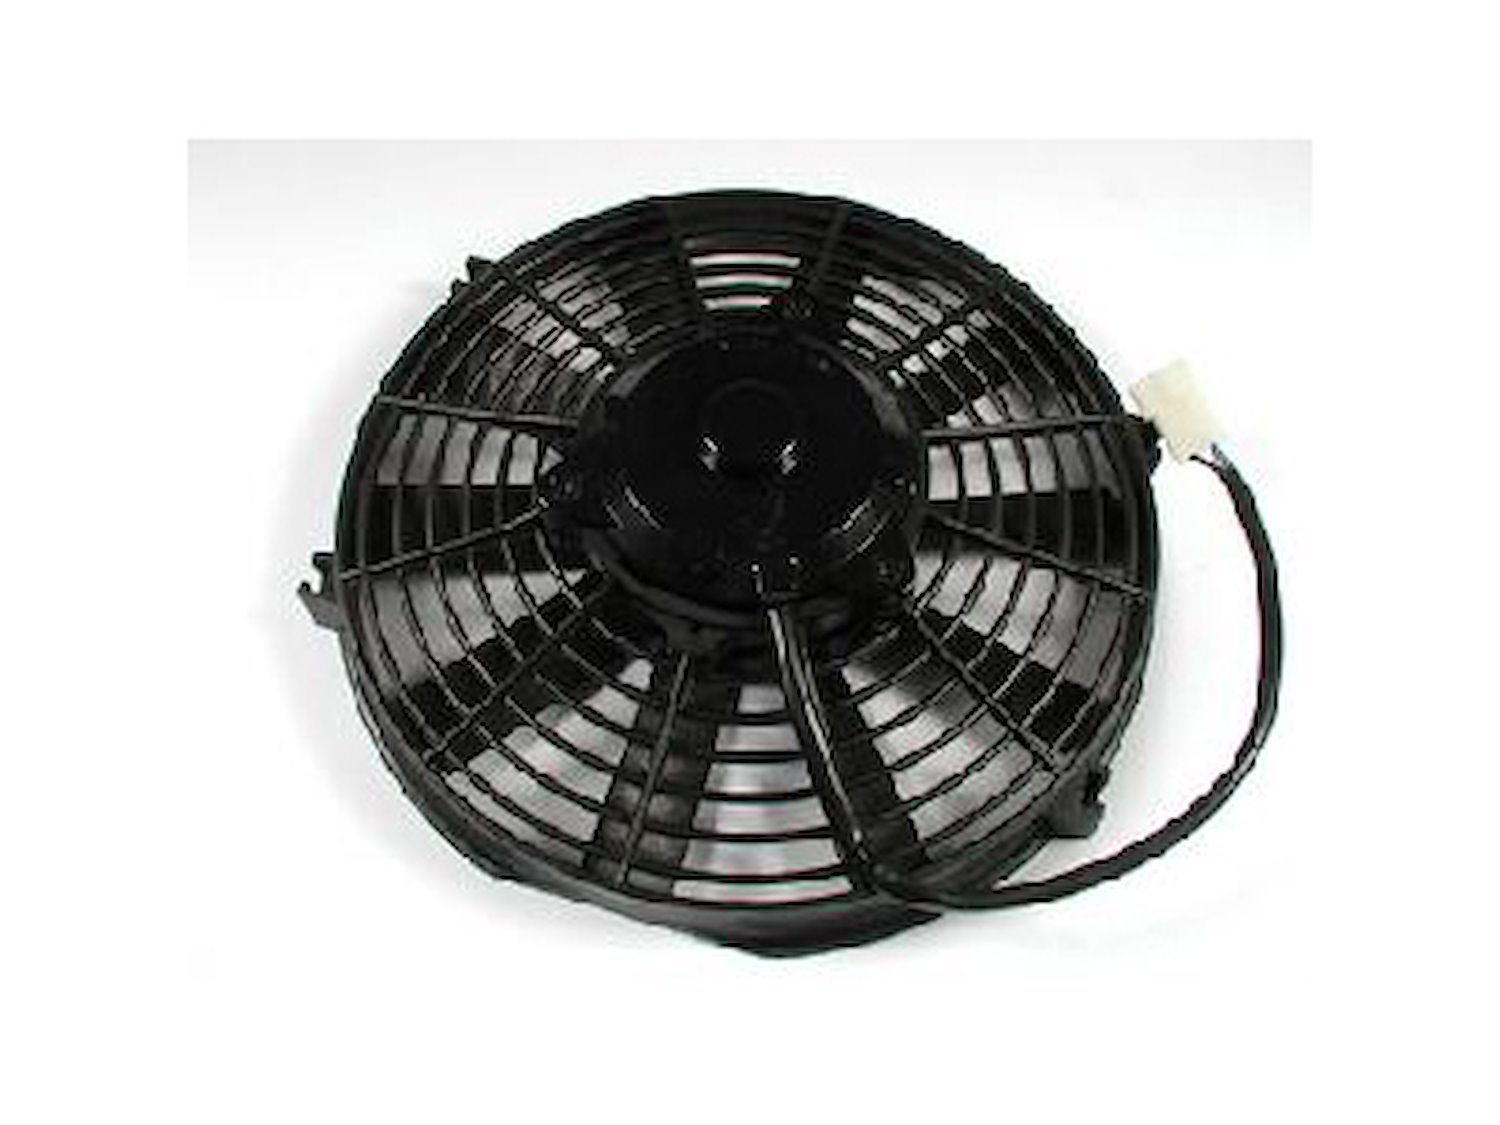 10" Electric Fan : Thickness 3.09"  950 CFM  2600 RPM  8.3 amp draw